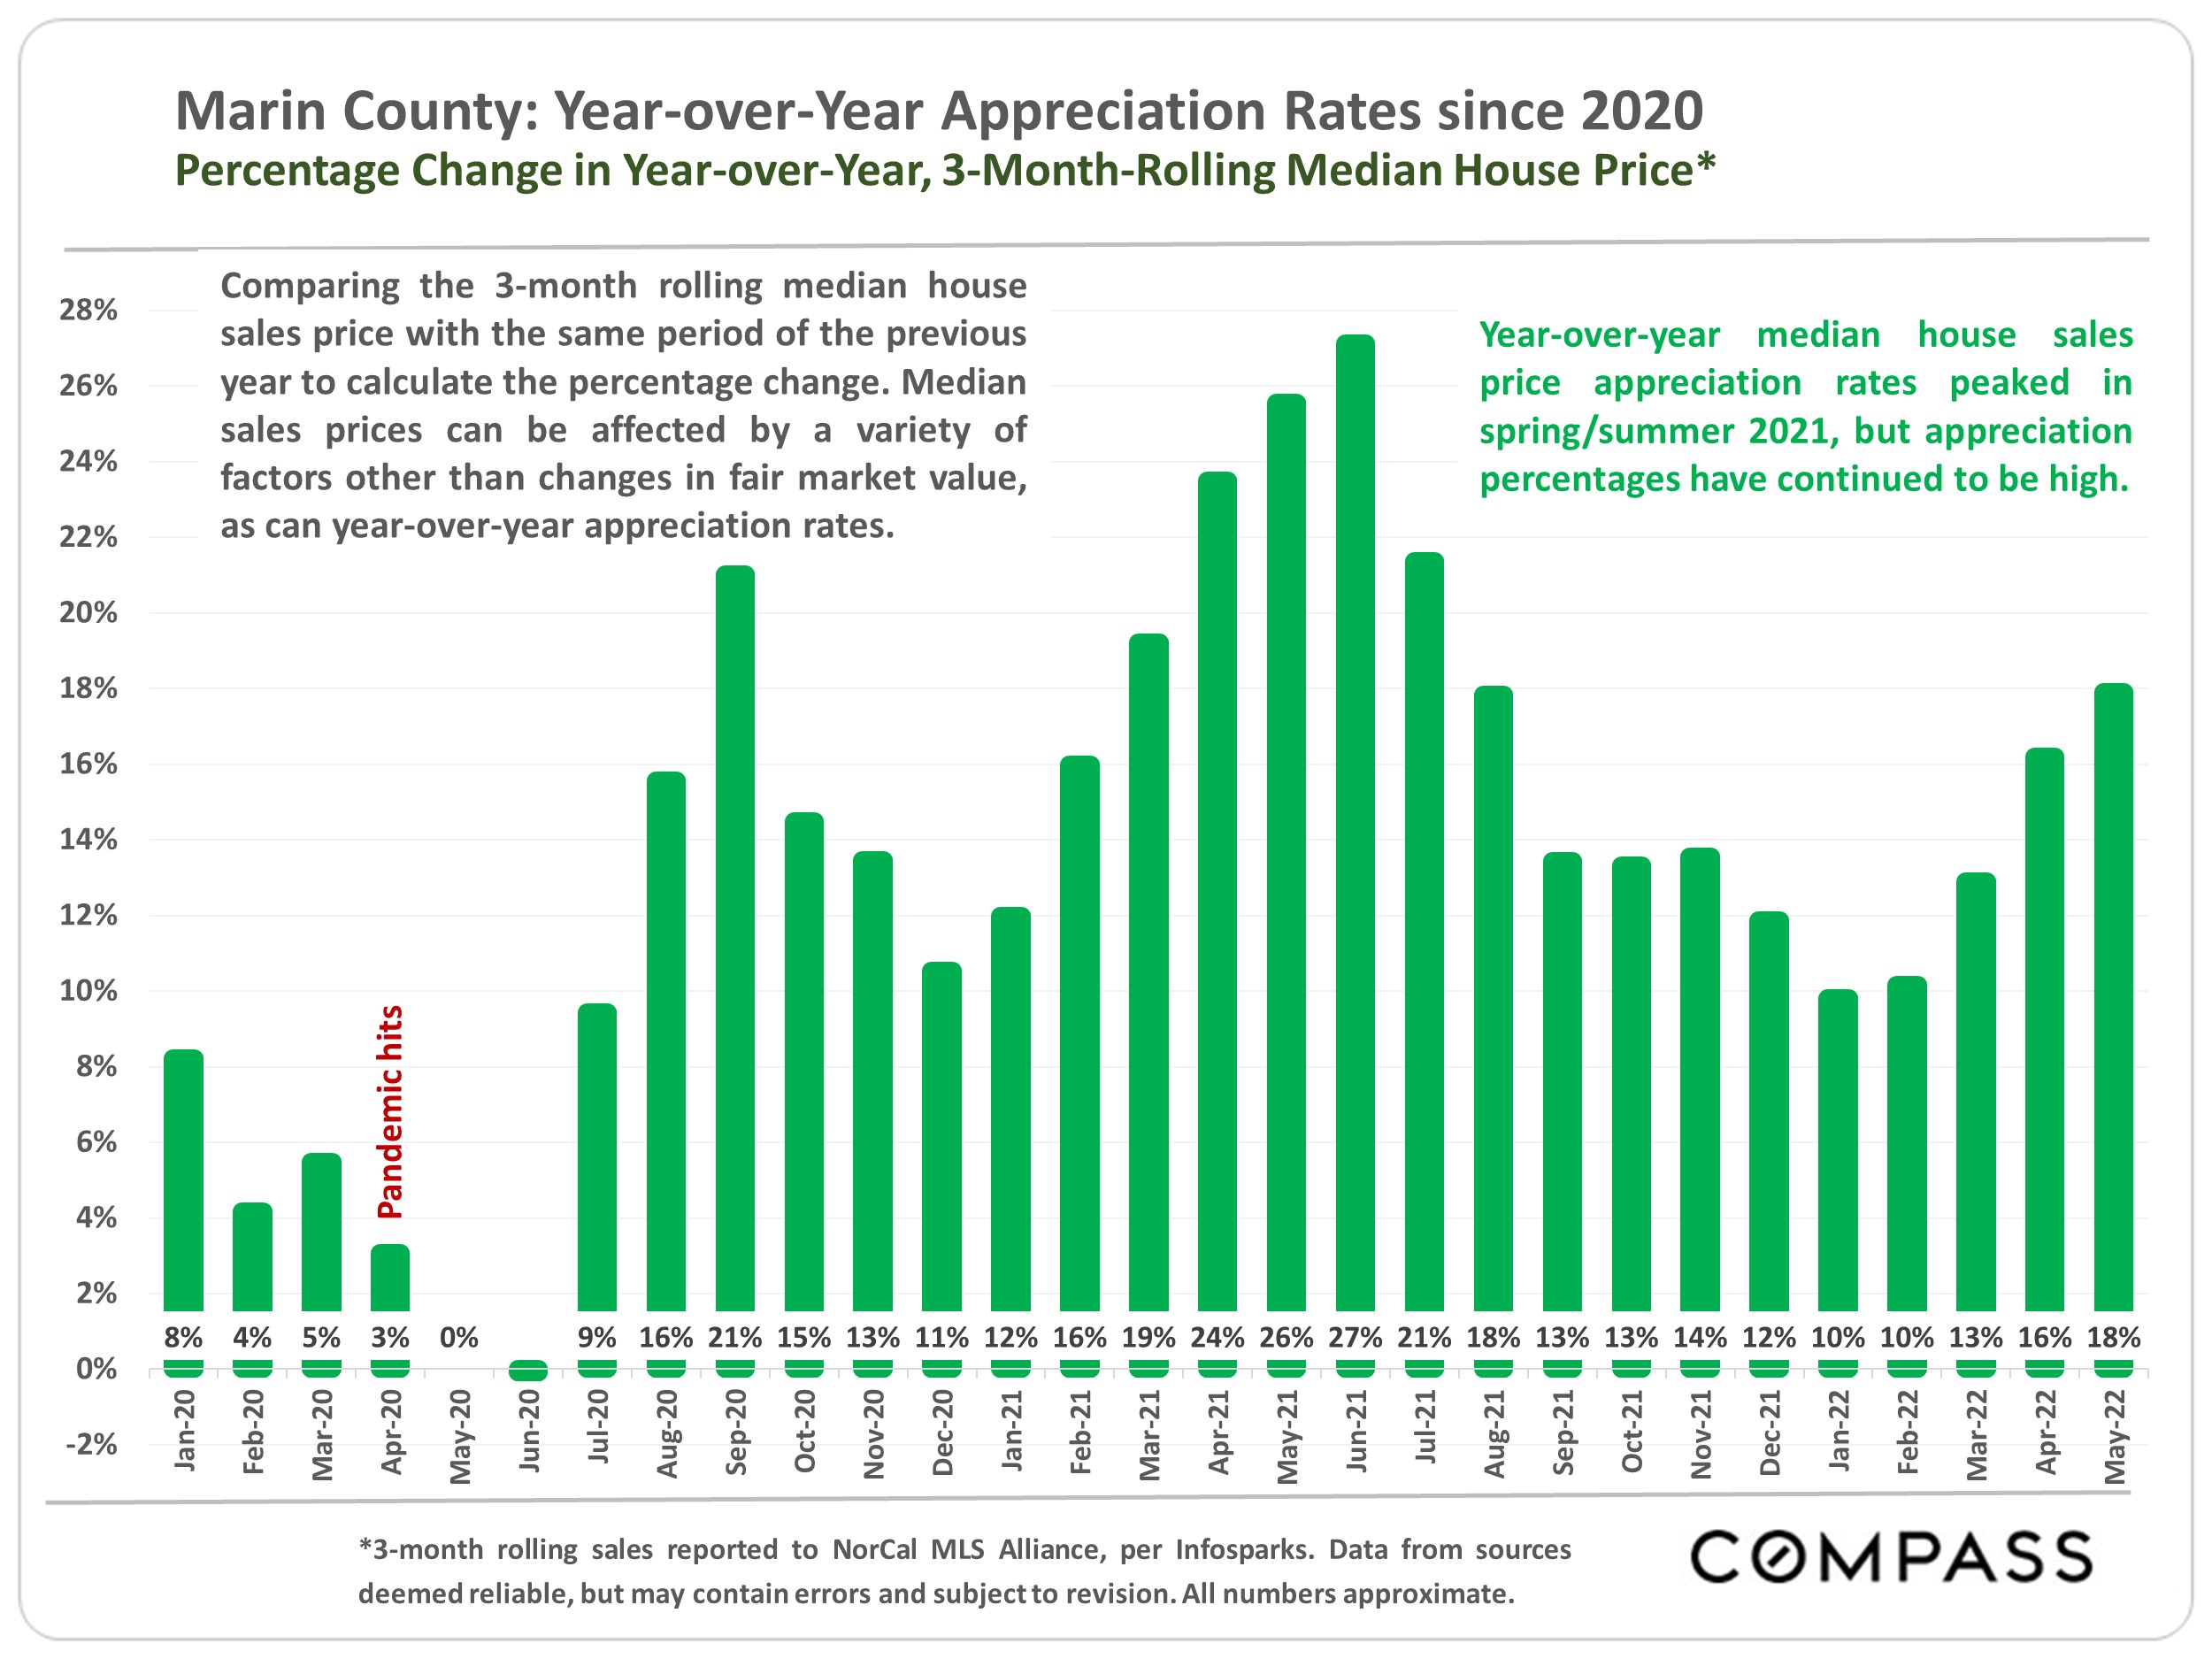 Marin County: Year-over-Year Appreciation Rates since 2020